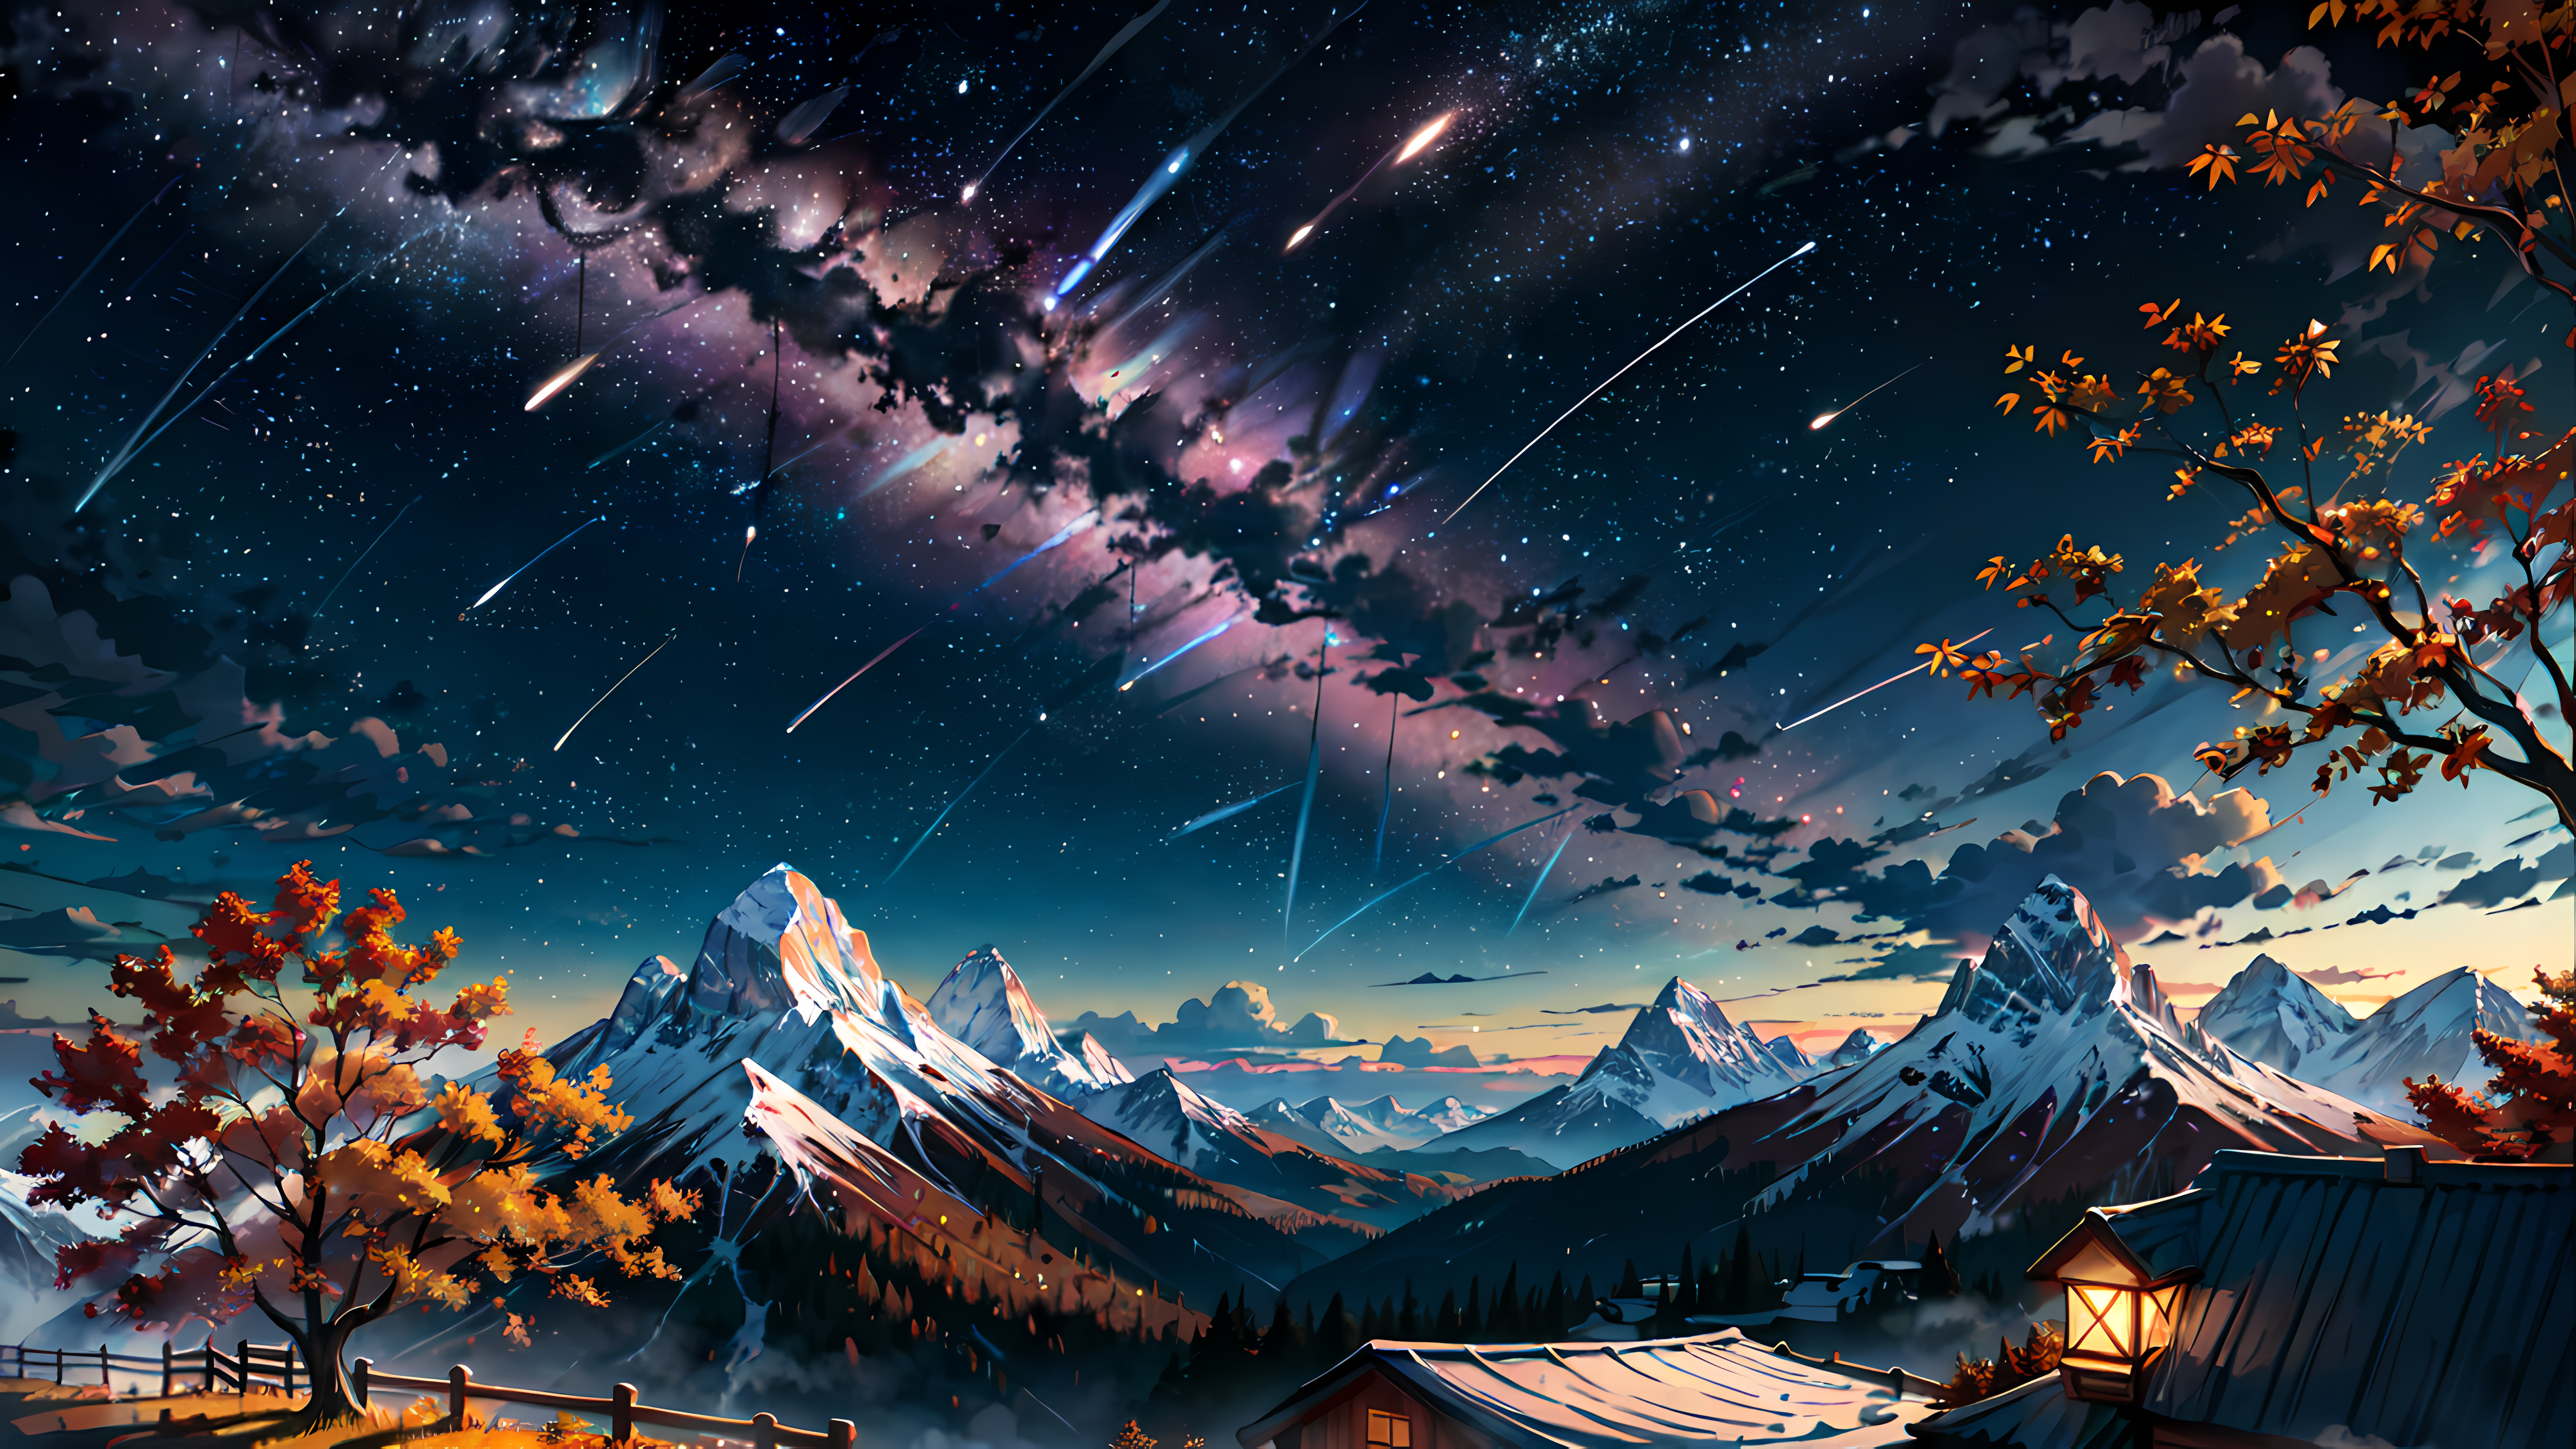 General 5120x2880 AI art maple leaves snowy mountain oil lamp meteor streak outdoors stars mountains snow sky clouds